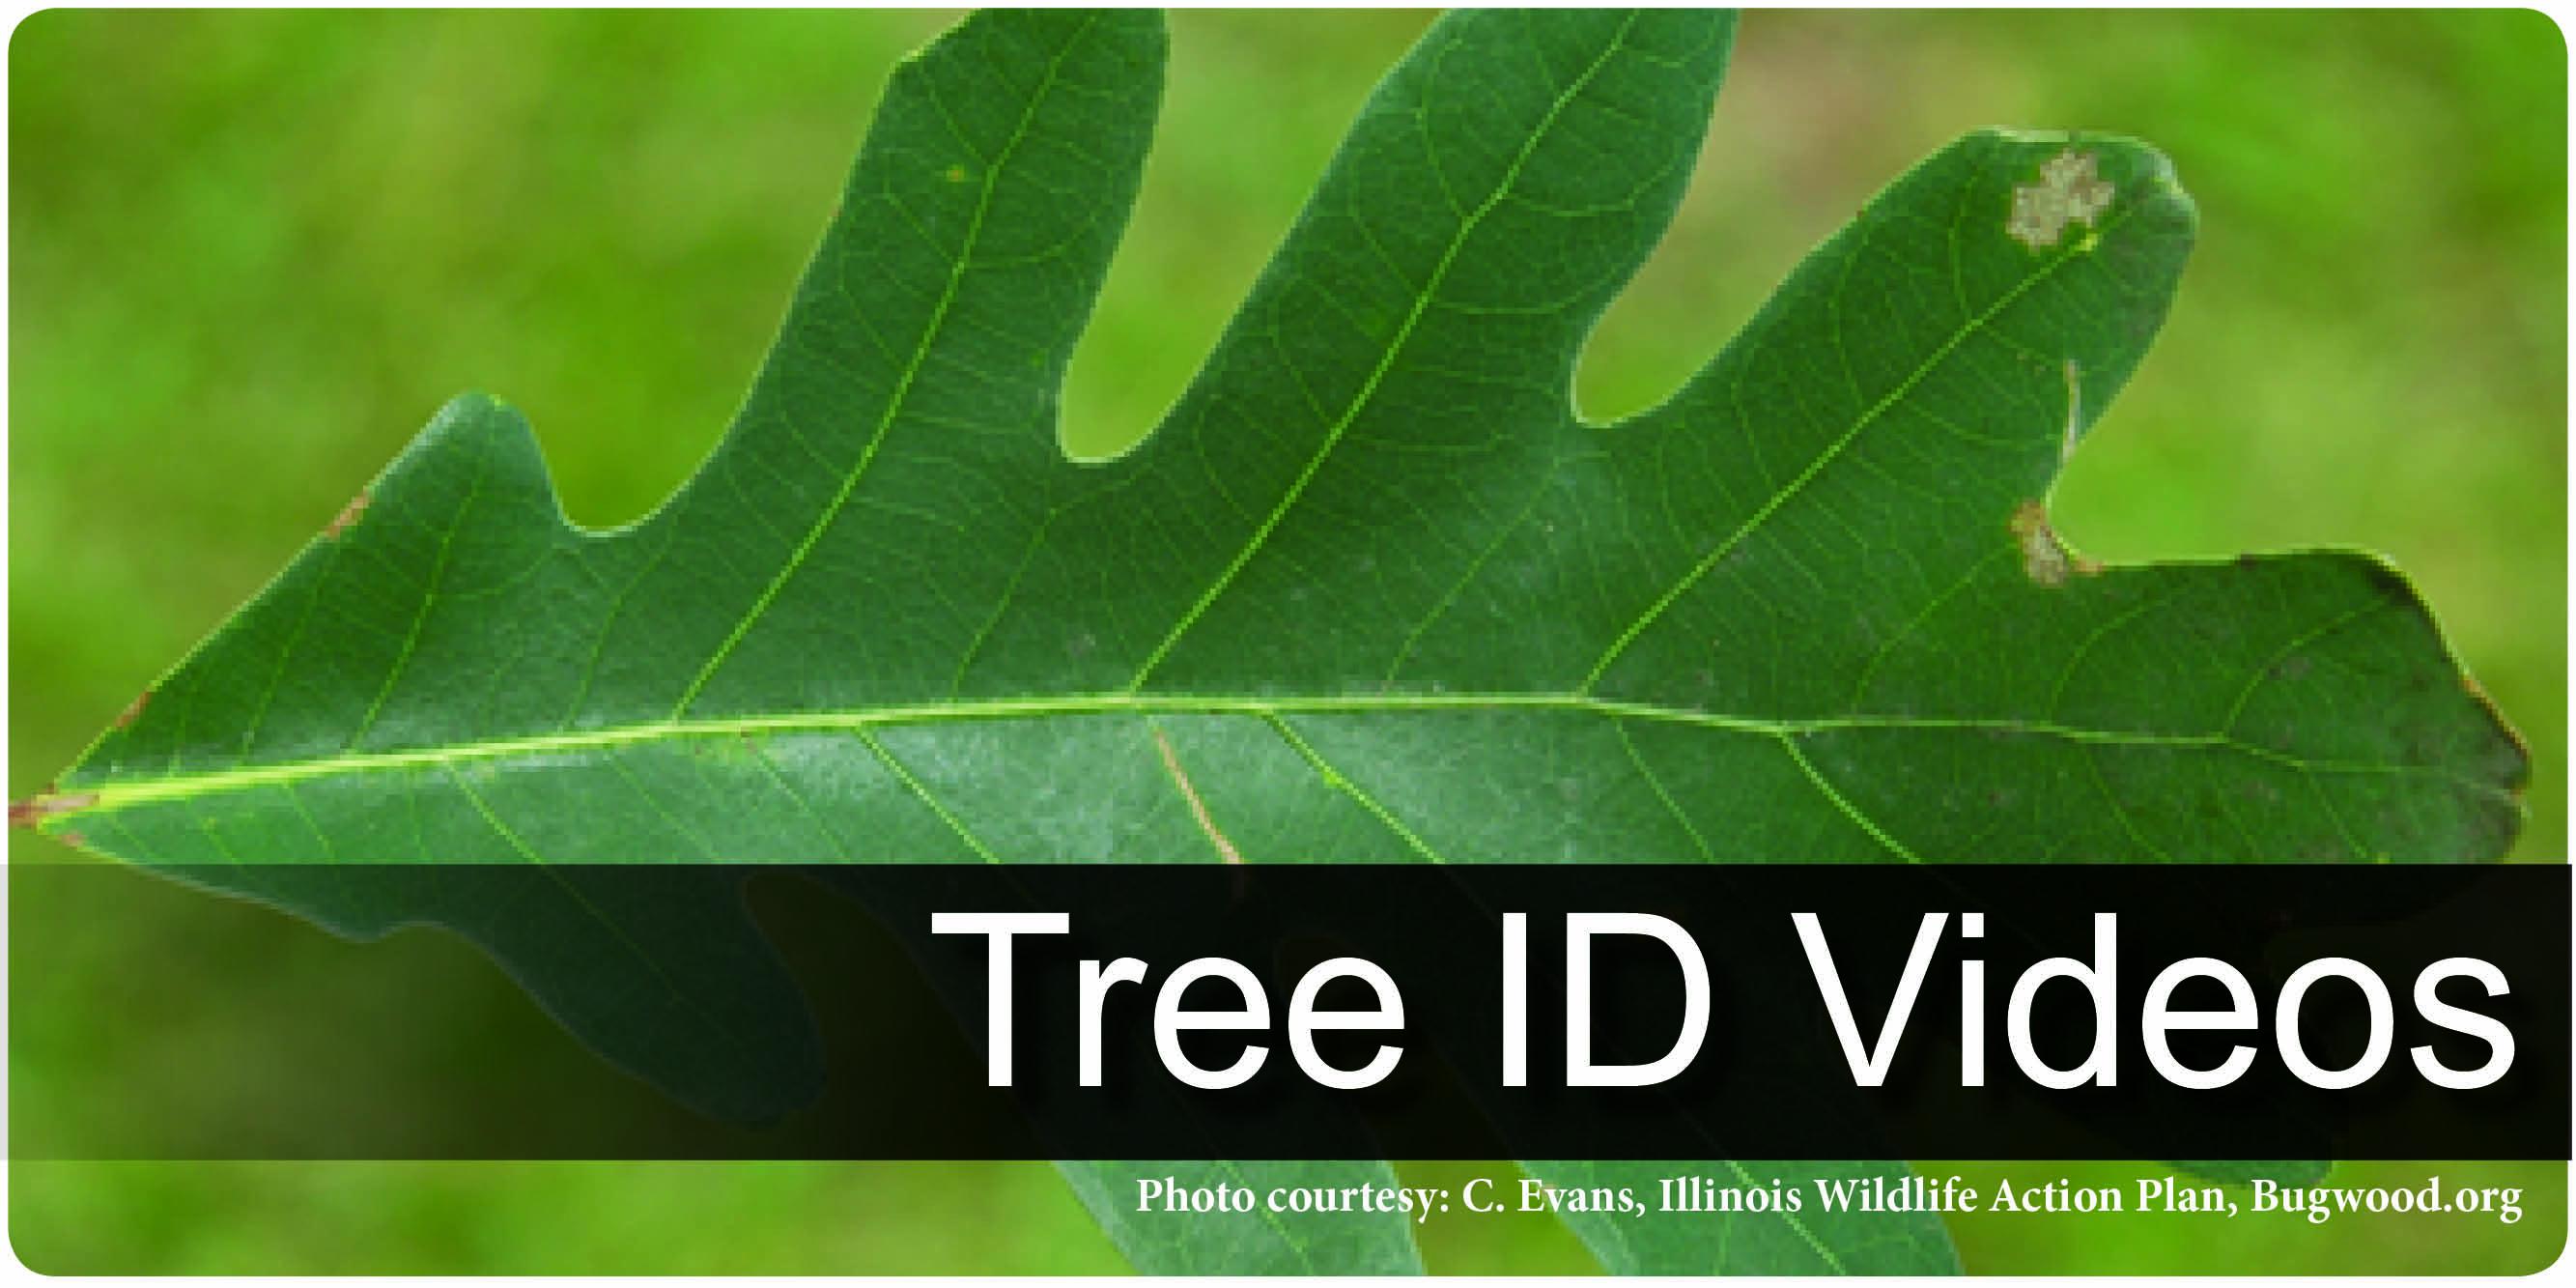 How to Identify Tree Videos